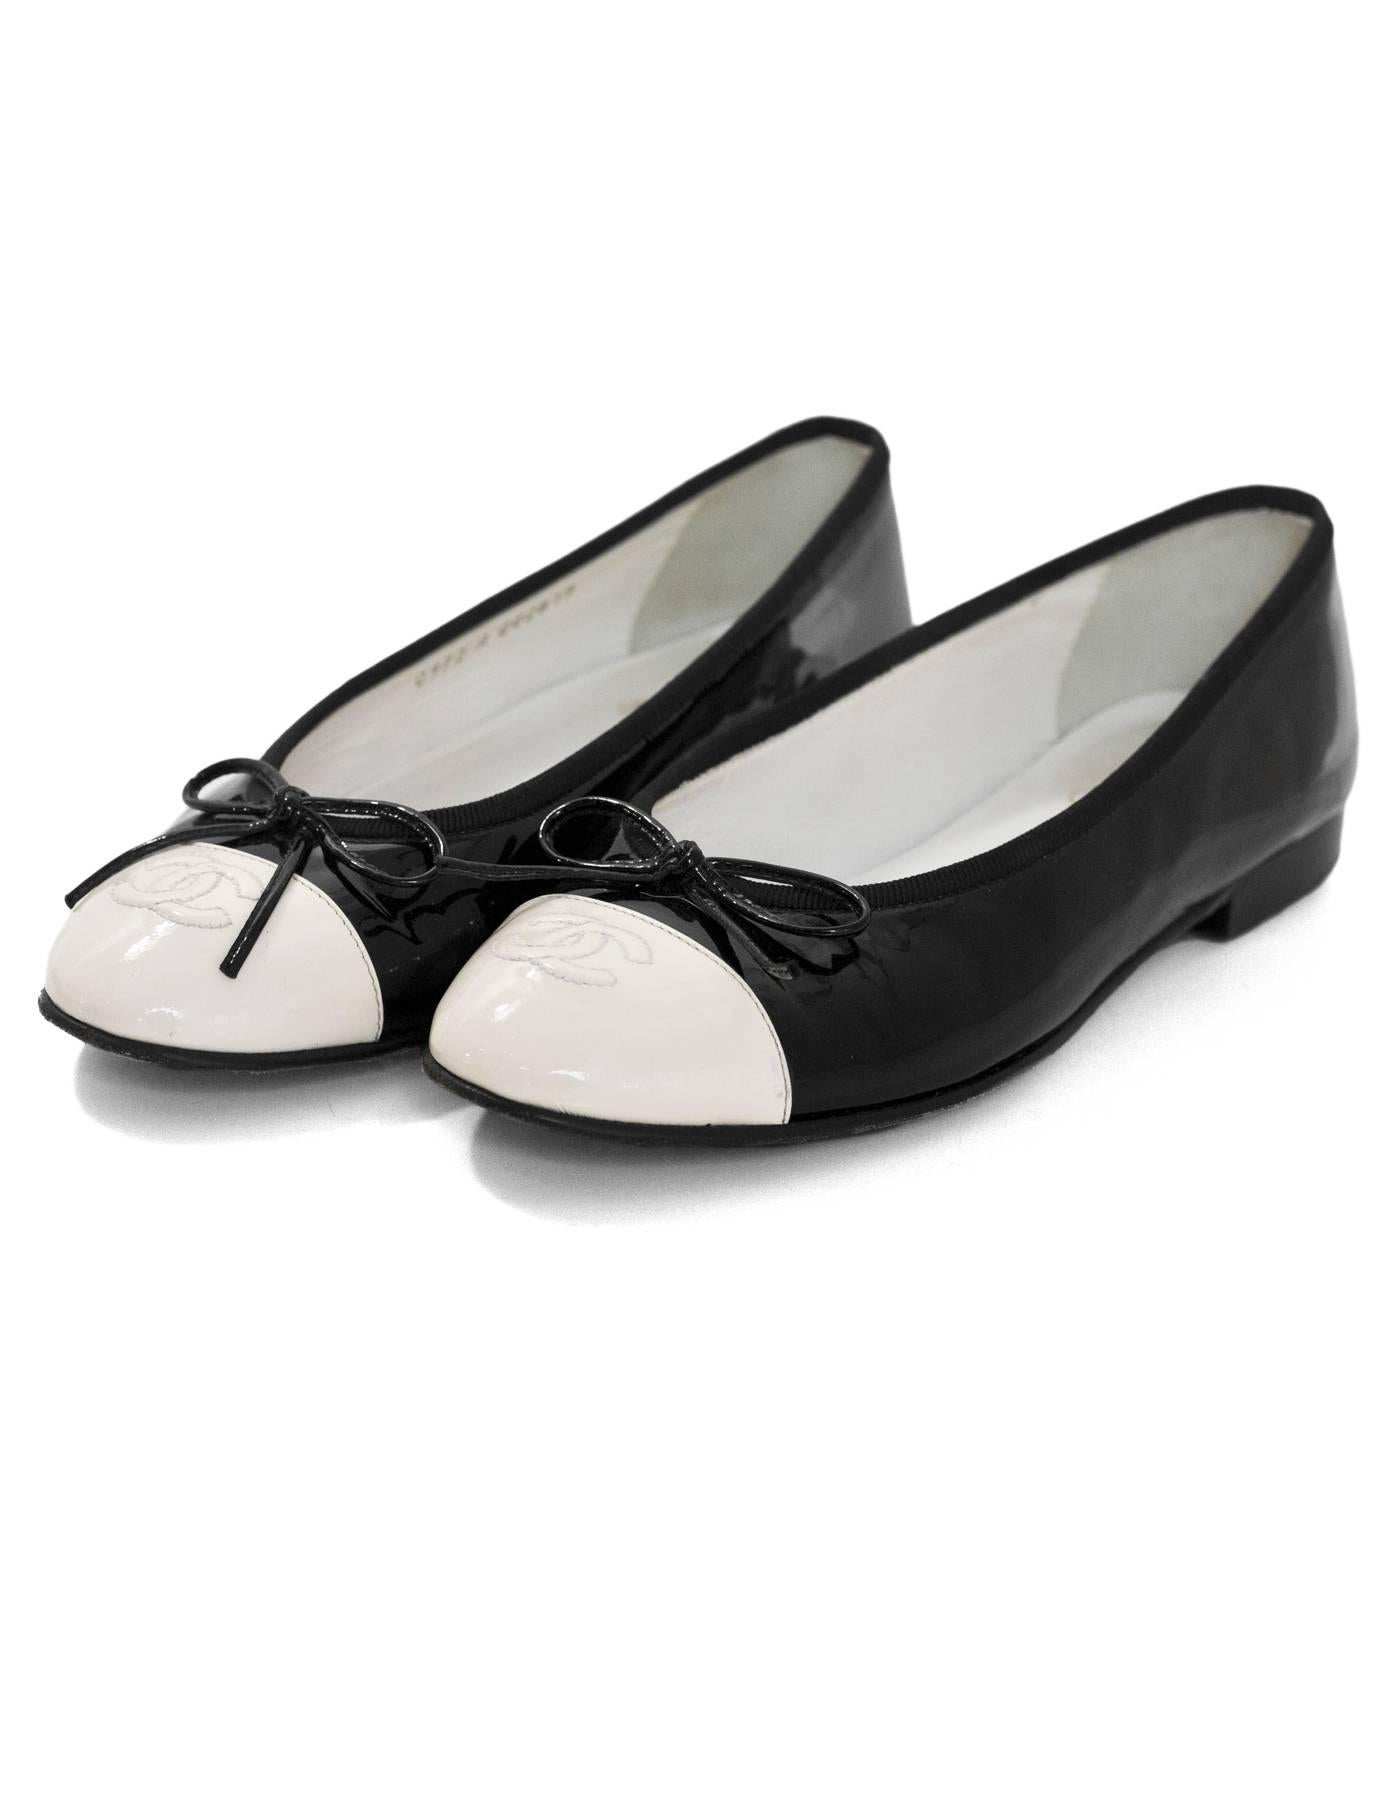 Chanel Black & White Patent Cap-Toe Flats Sz 37

Made In: Italy
Color: Black, white
Materials: Patent leather
Closure/Opening: Slide on
Sole Stamp: CC made in italy 37
Overall Condition: Very good pre-owned condition with the exception of some wear